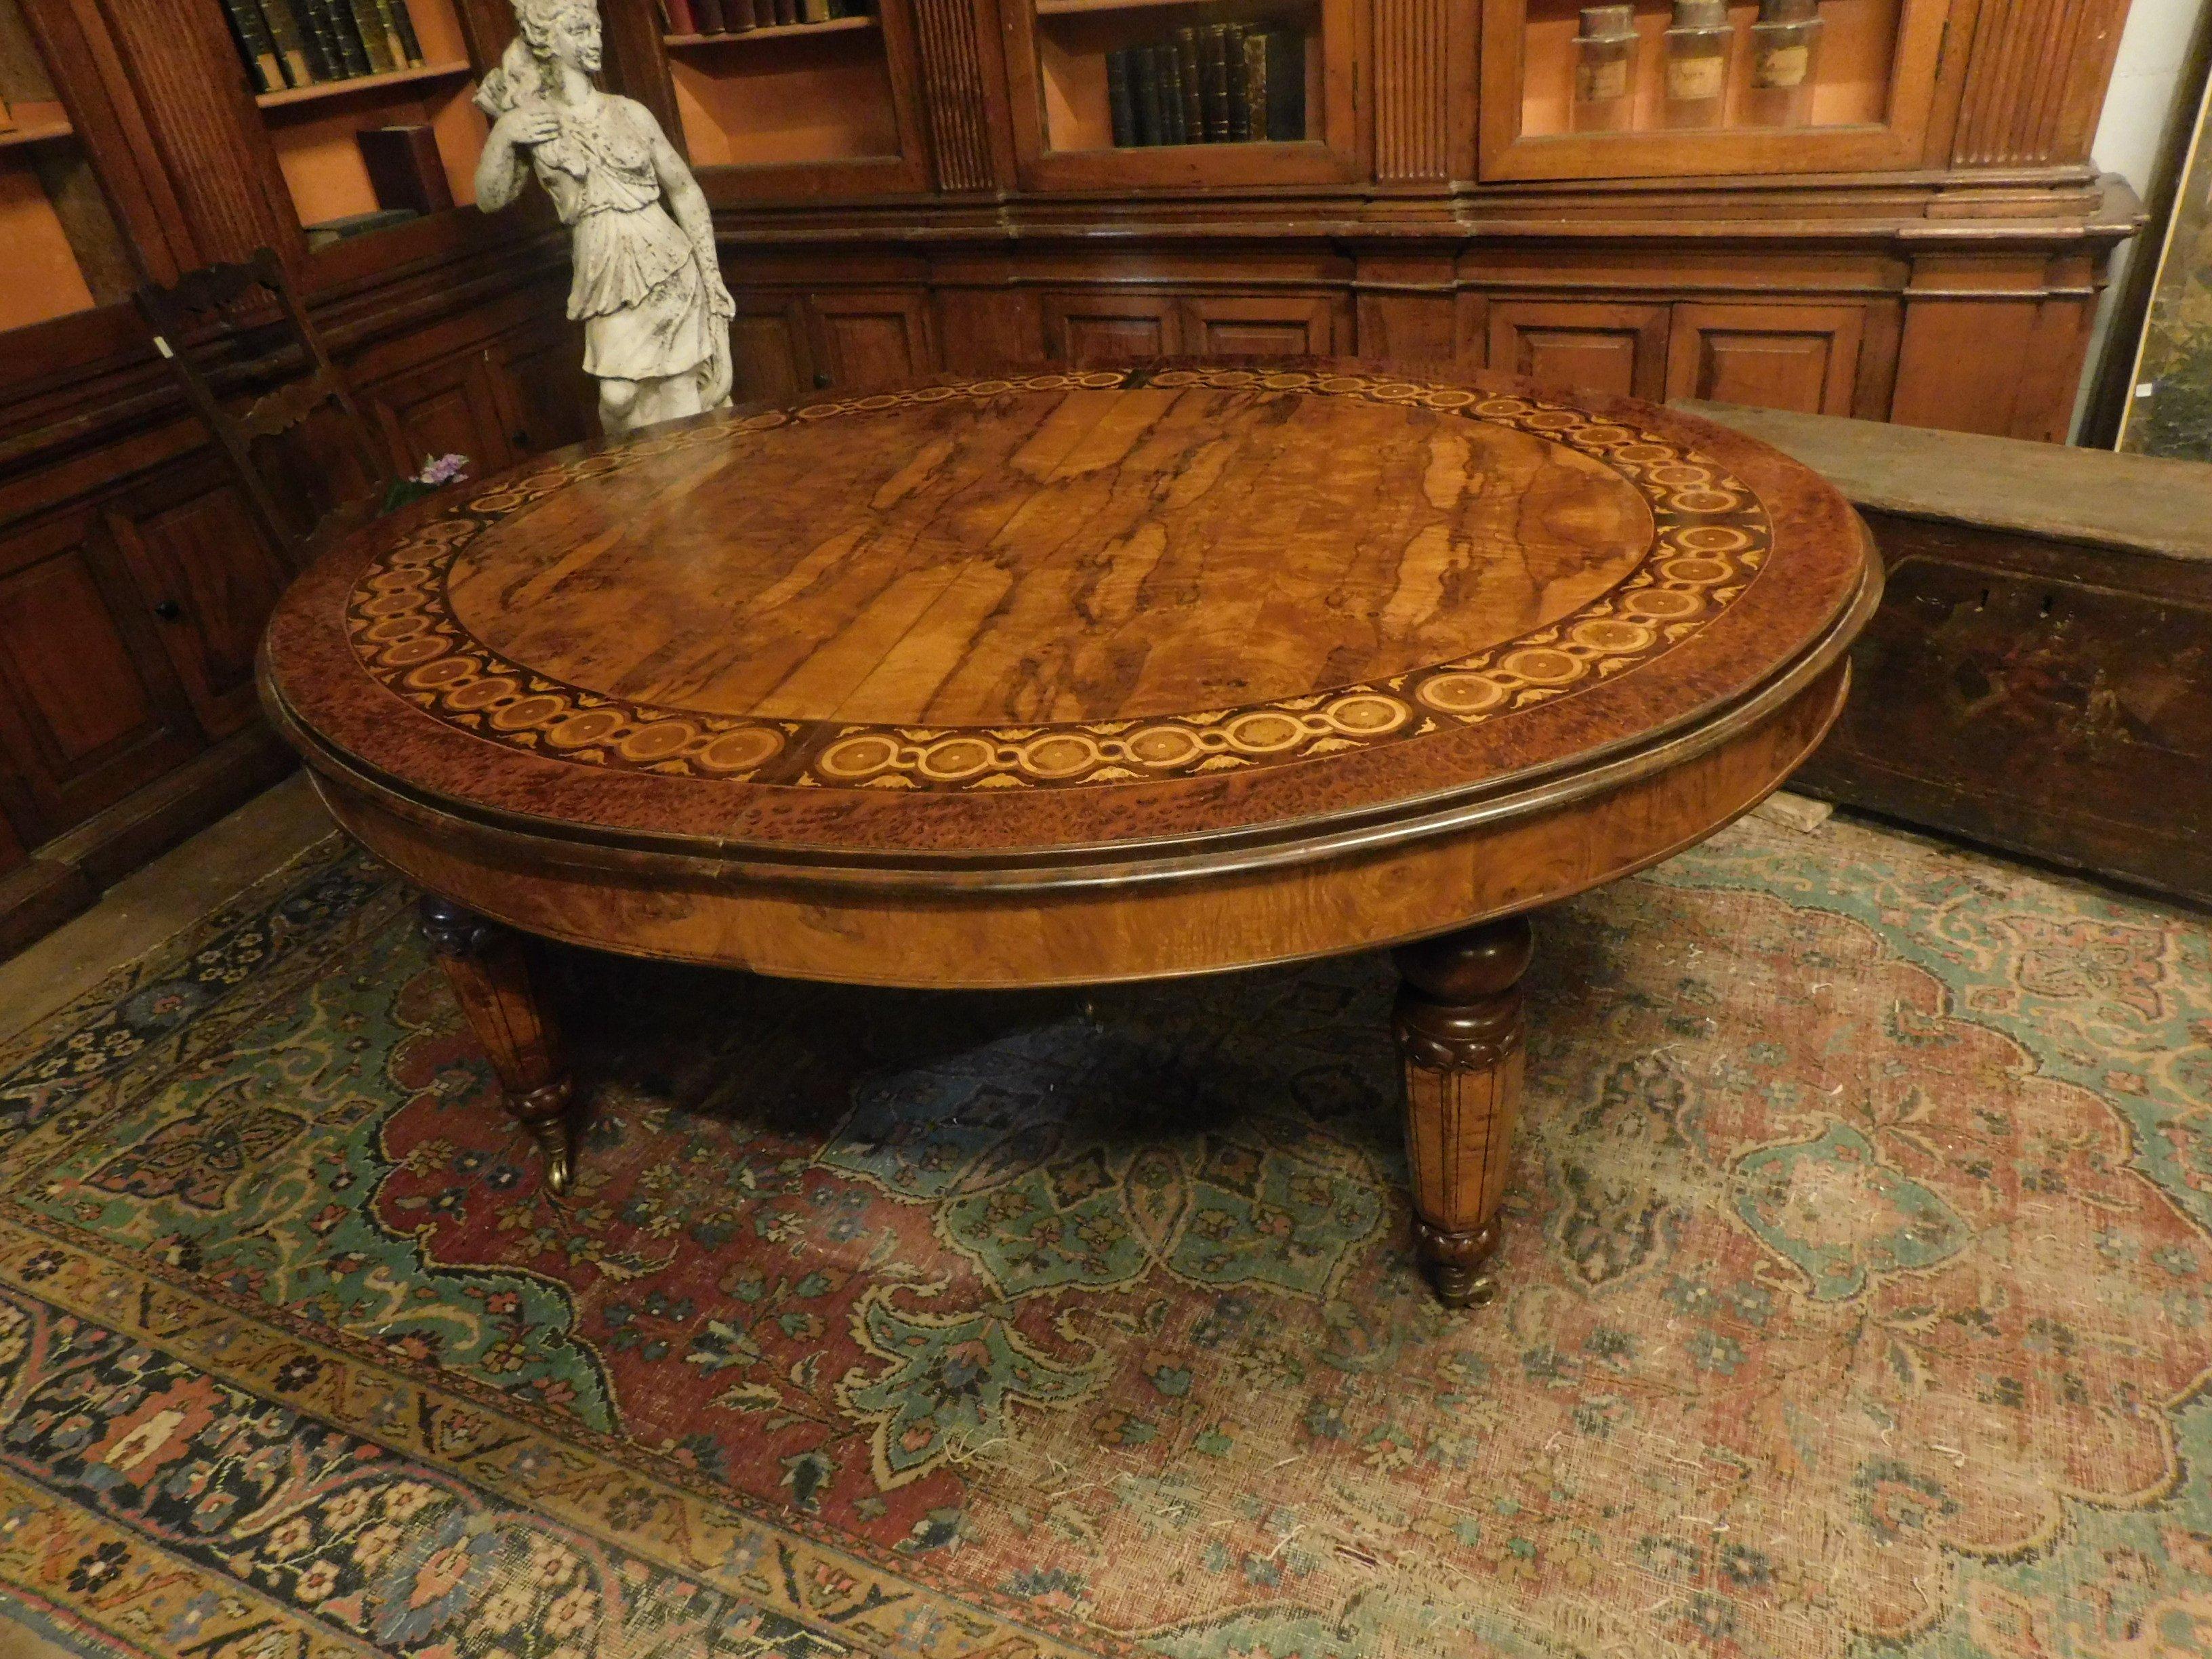 Antique table inlaid in mixed woods including dark and light brown walnut, briar, wick finish, hand polished with precious inlays of nature. Extendable dining table, has 4 extensions all also inlaid, very nice even without a tablecloth, it has a